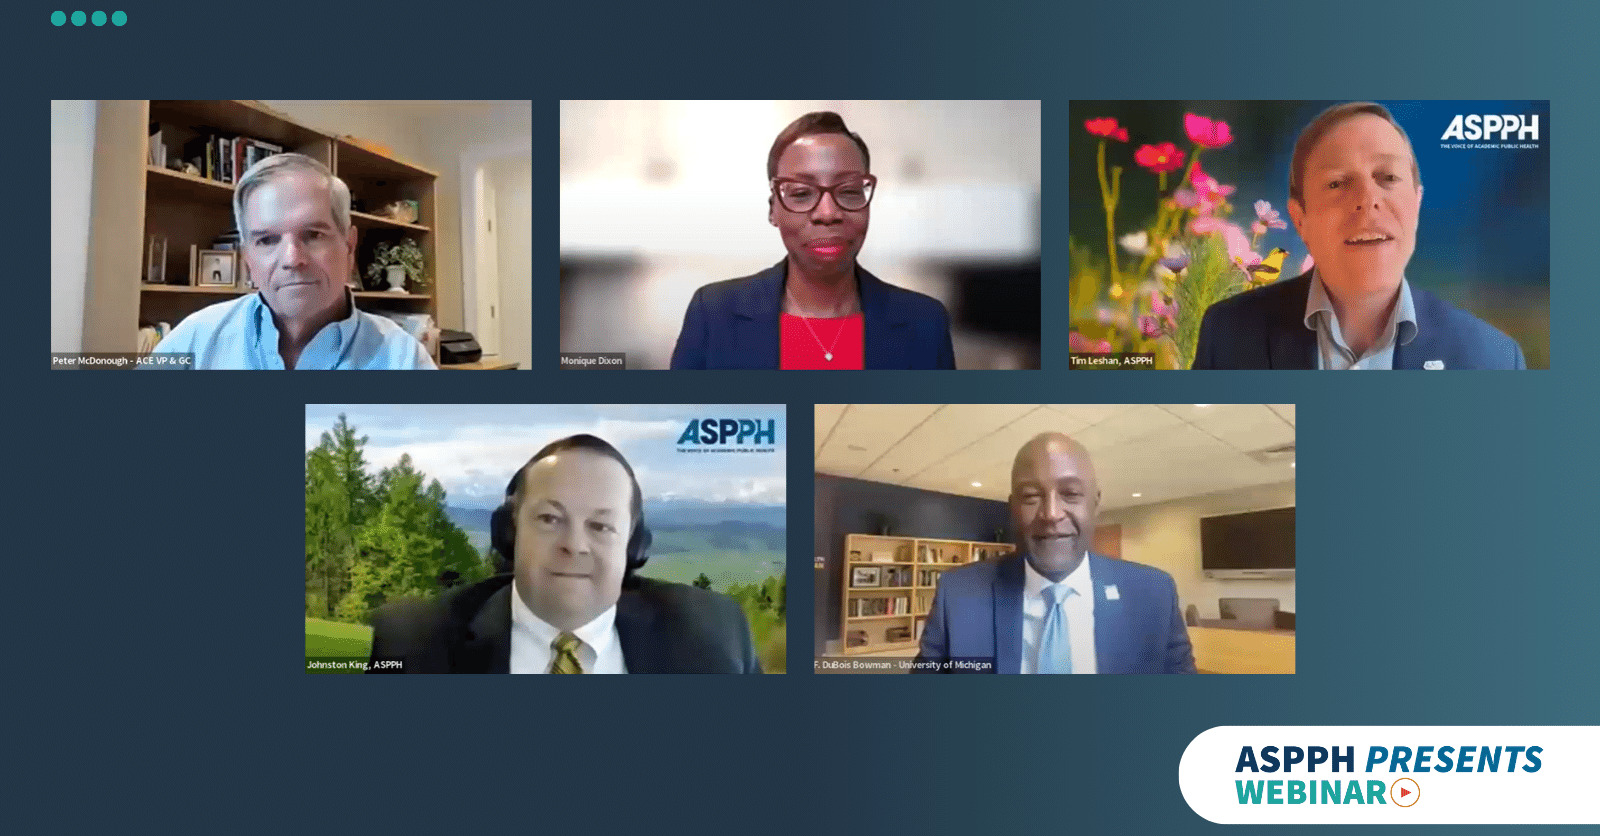 Five individuals participating in an ASPPH Presents Webinar on Zoom